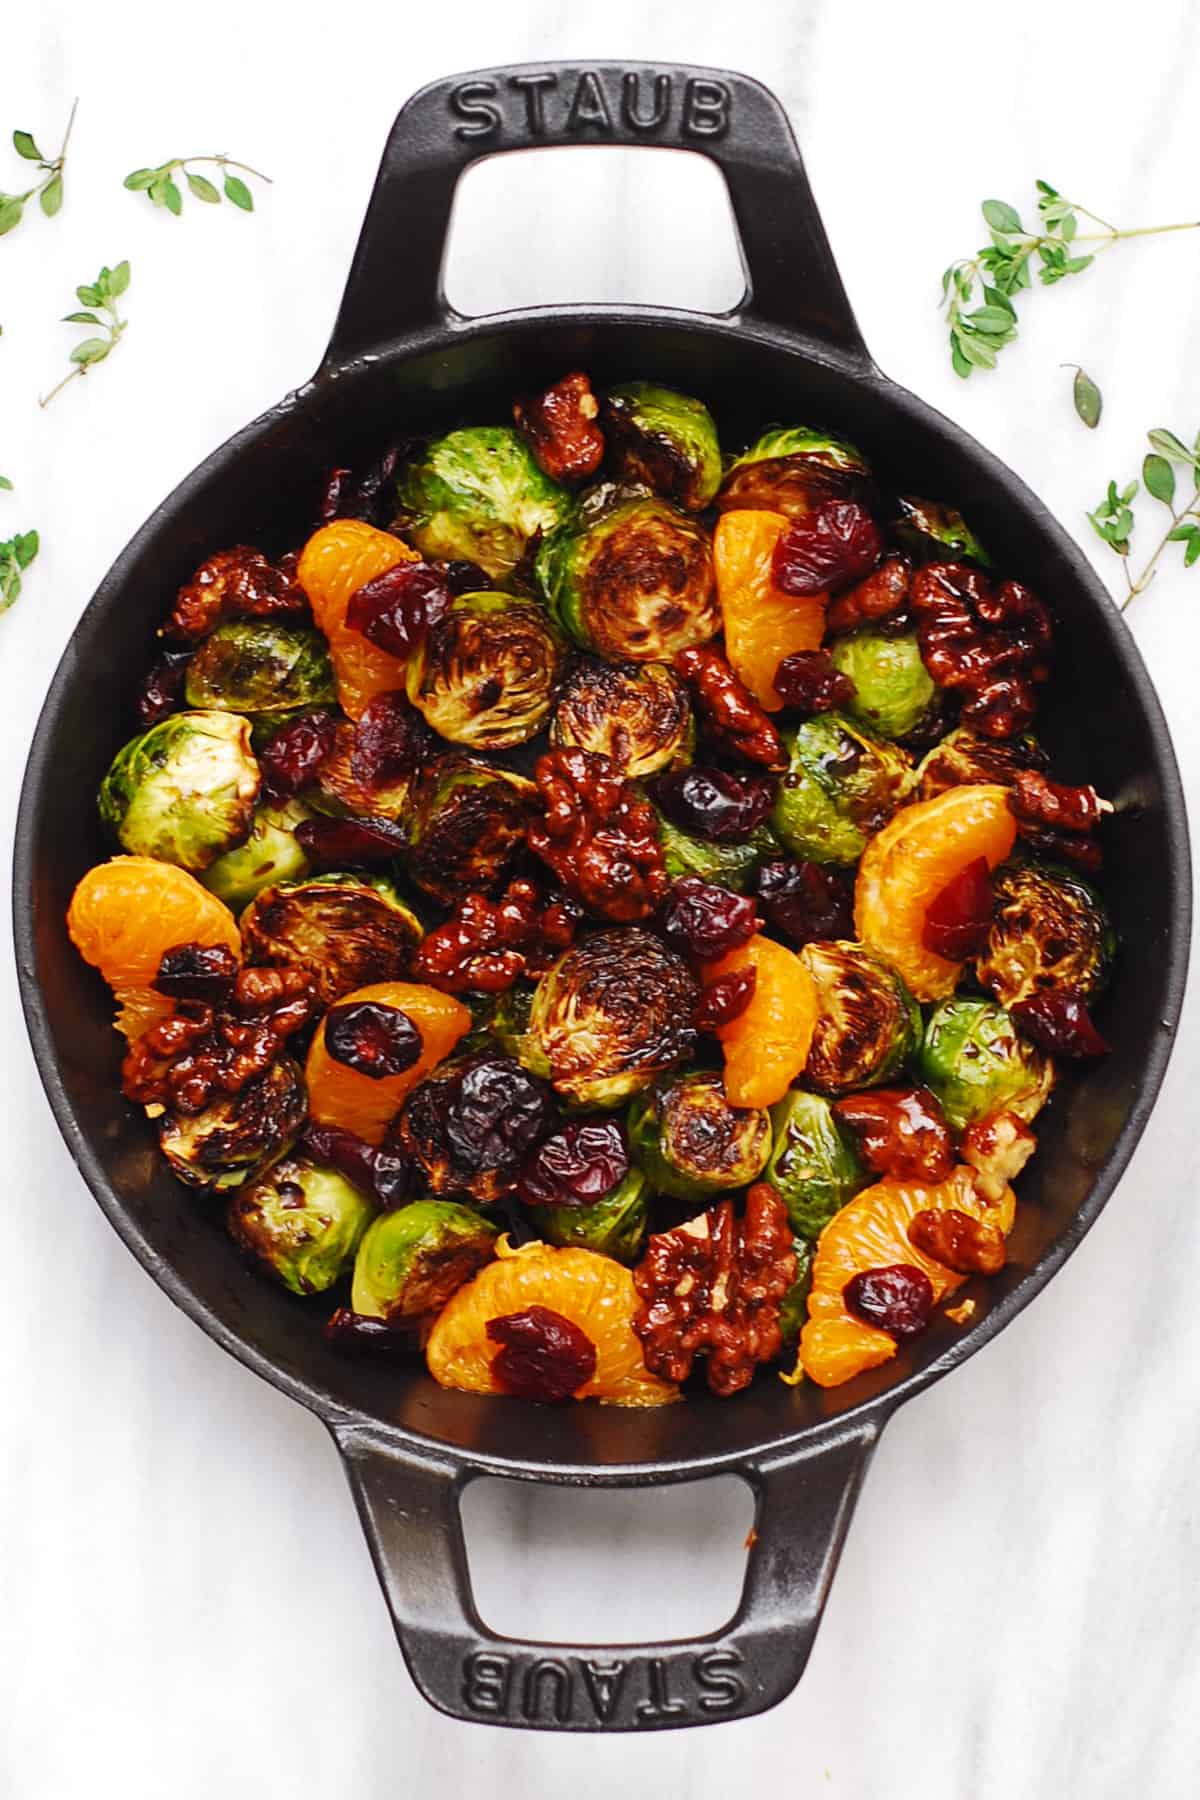 mandarin orange salad with dried cranberries, walnuts, roasted Brussels sprouts, and balsamic glaze in a cast-iron pan